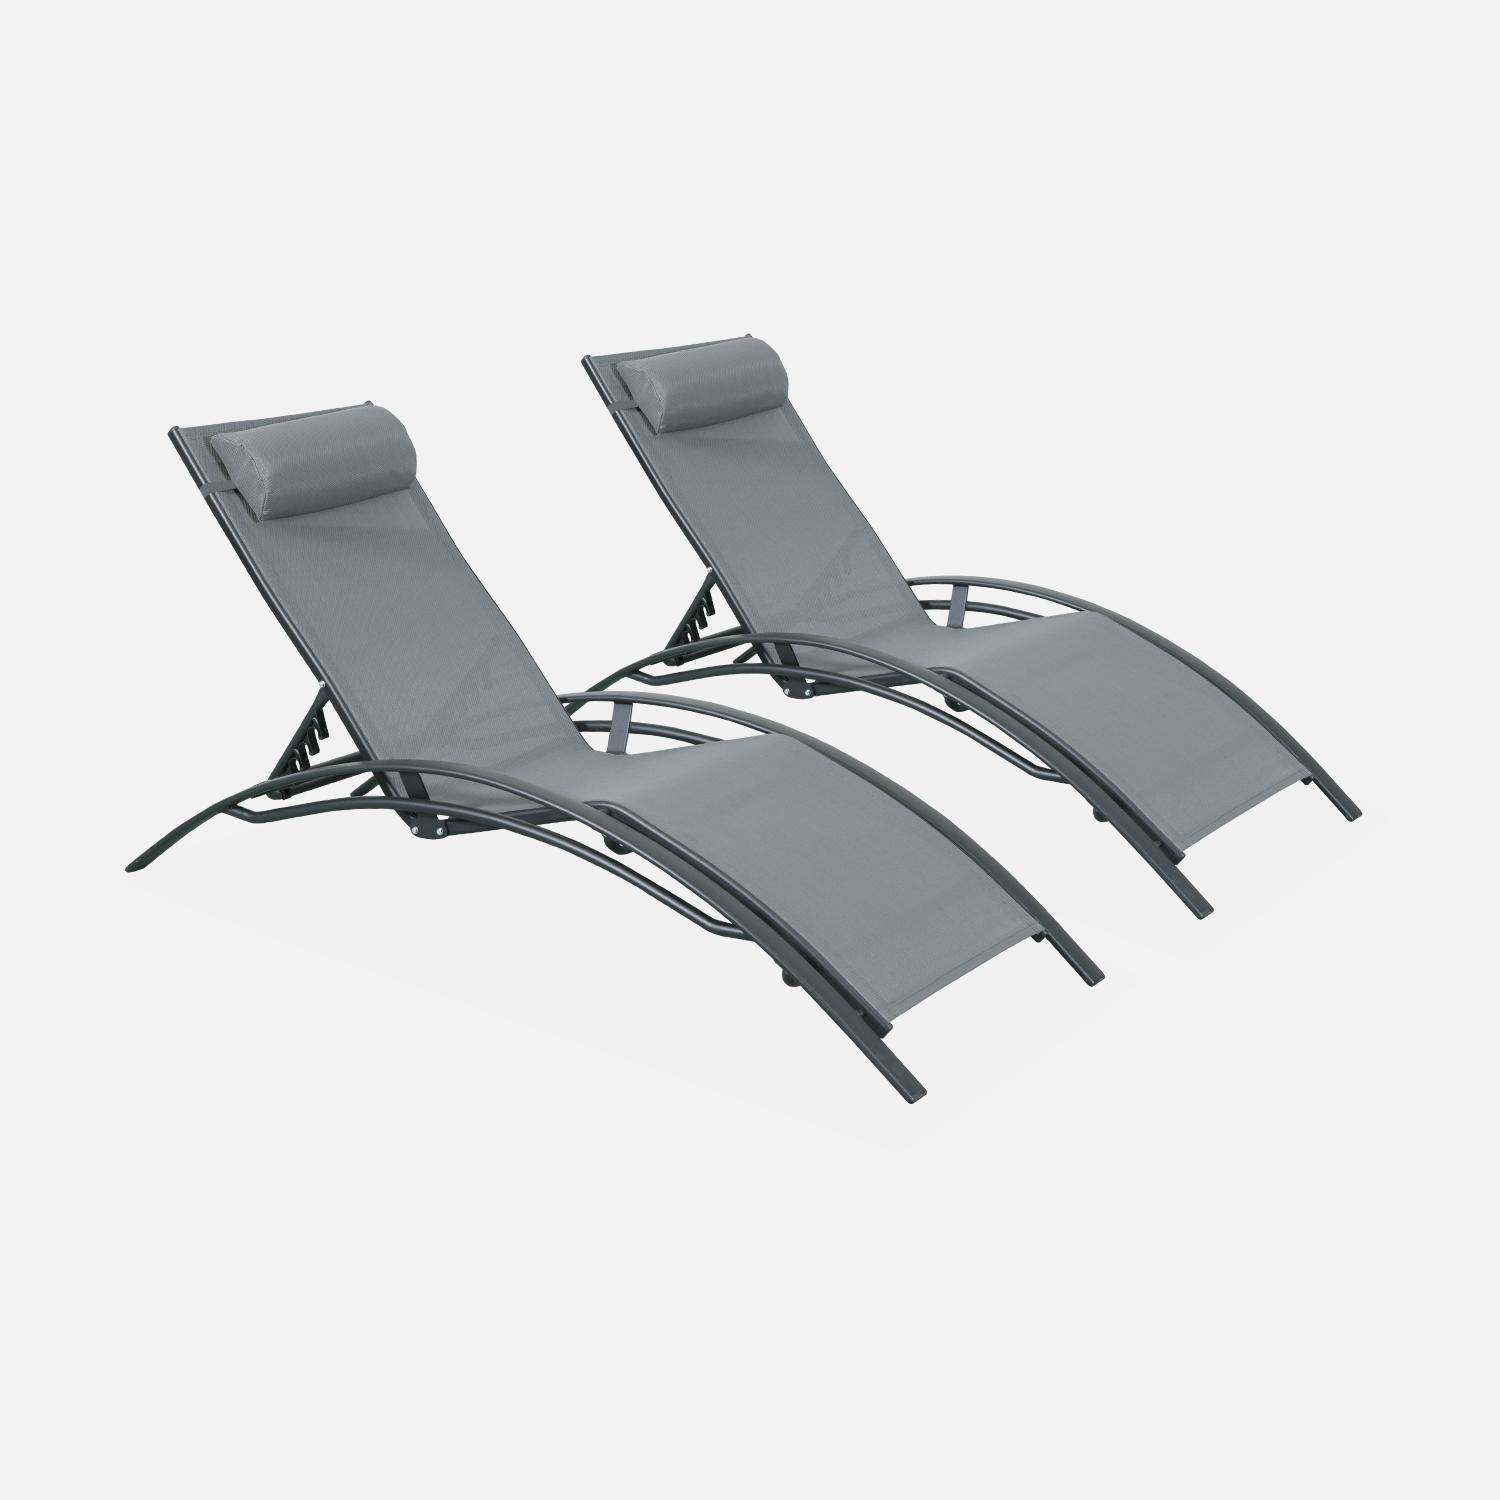 Pair of aluminium and textilene sun loungers, 4 reclining positions, headrest included, stackable - Louisa - Anthracite frame, Grey textilene Photo3